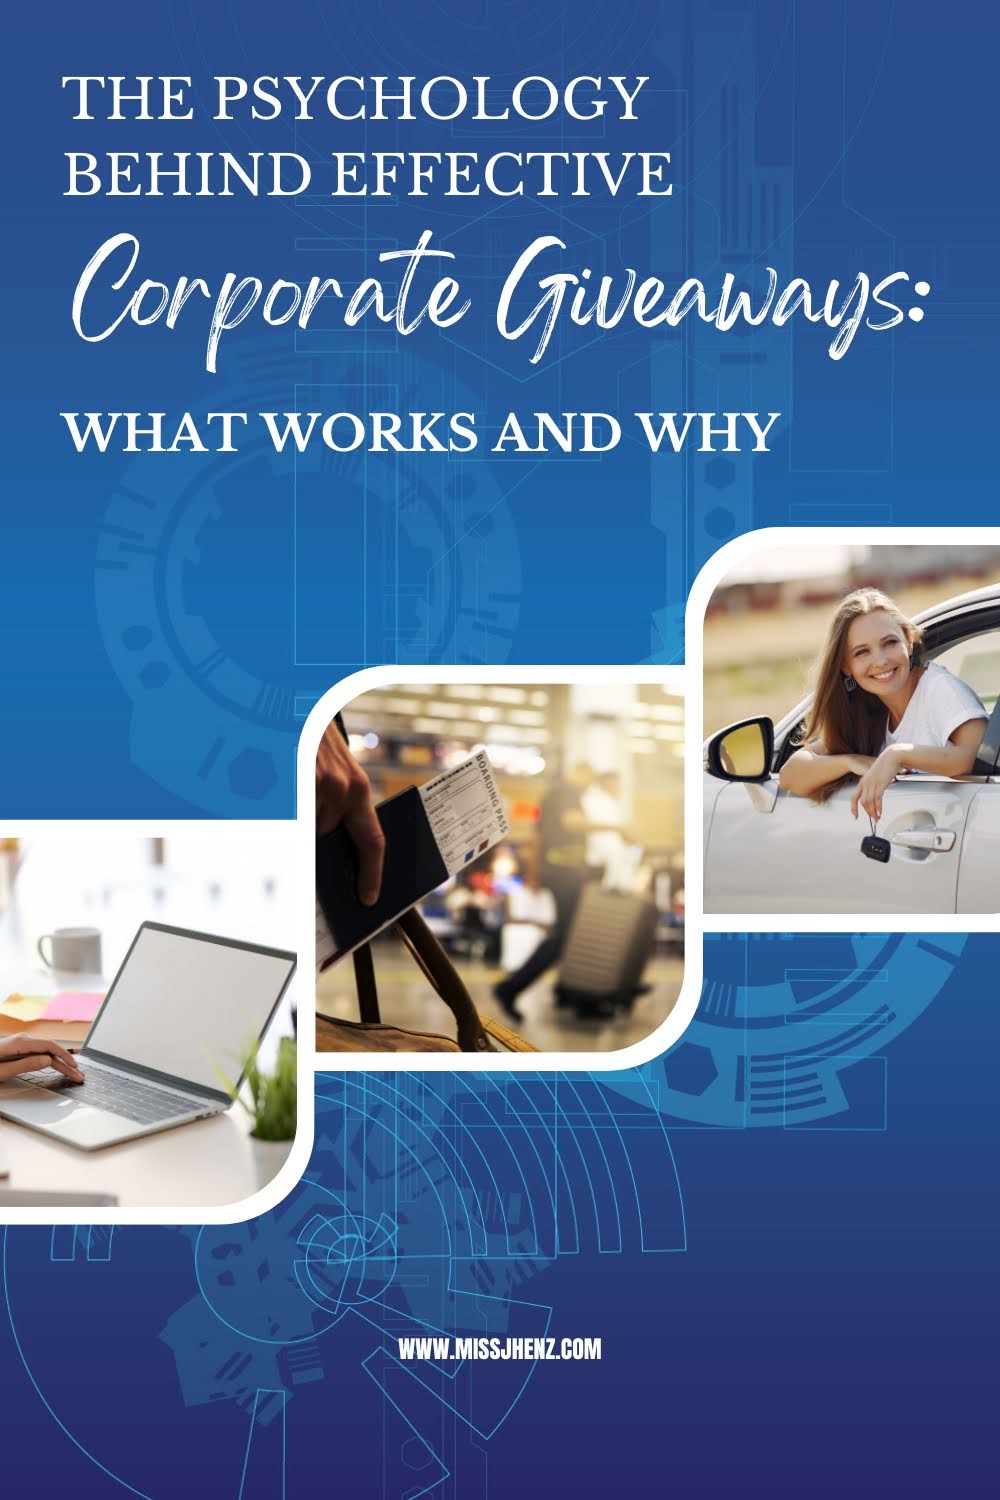 The Psychology Behind Effective Corporate Giveaways: What Works and Why